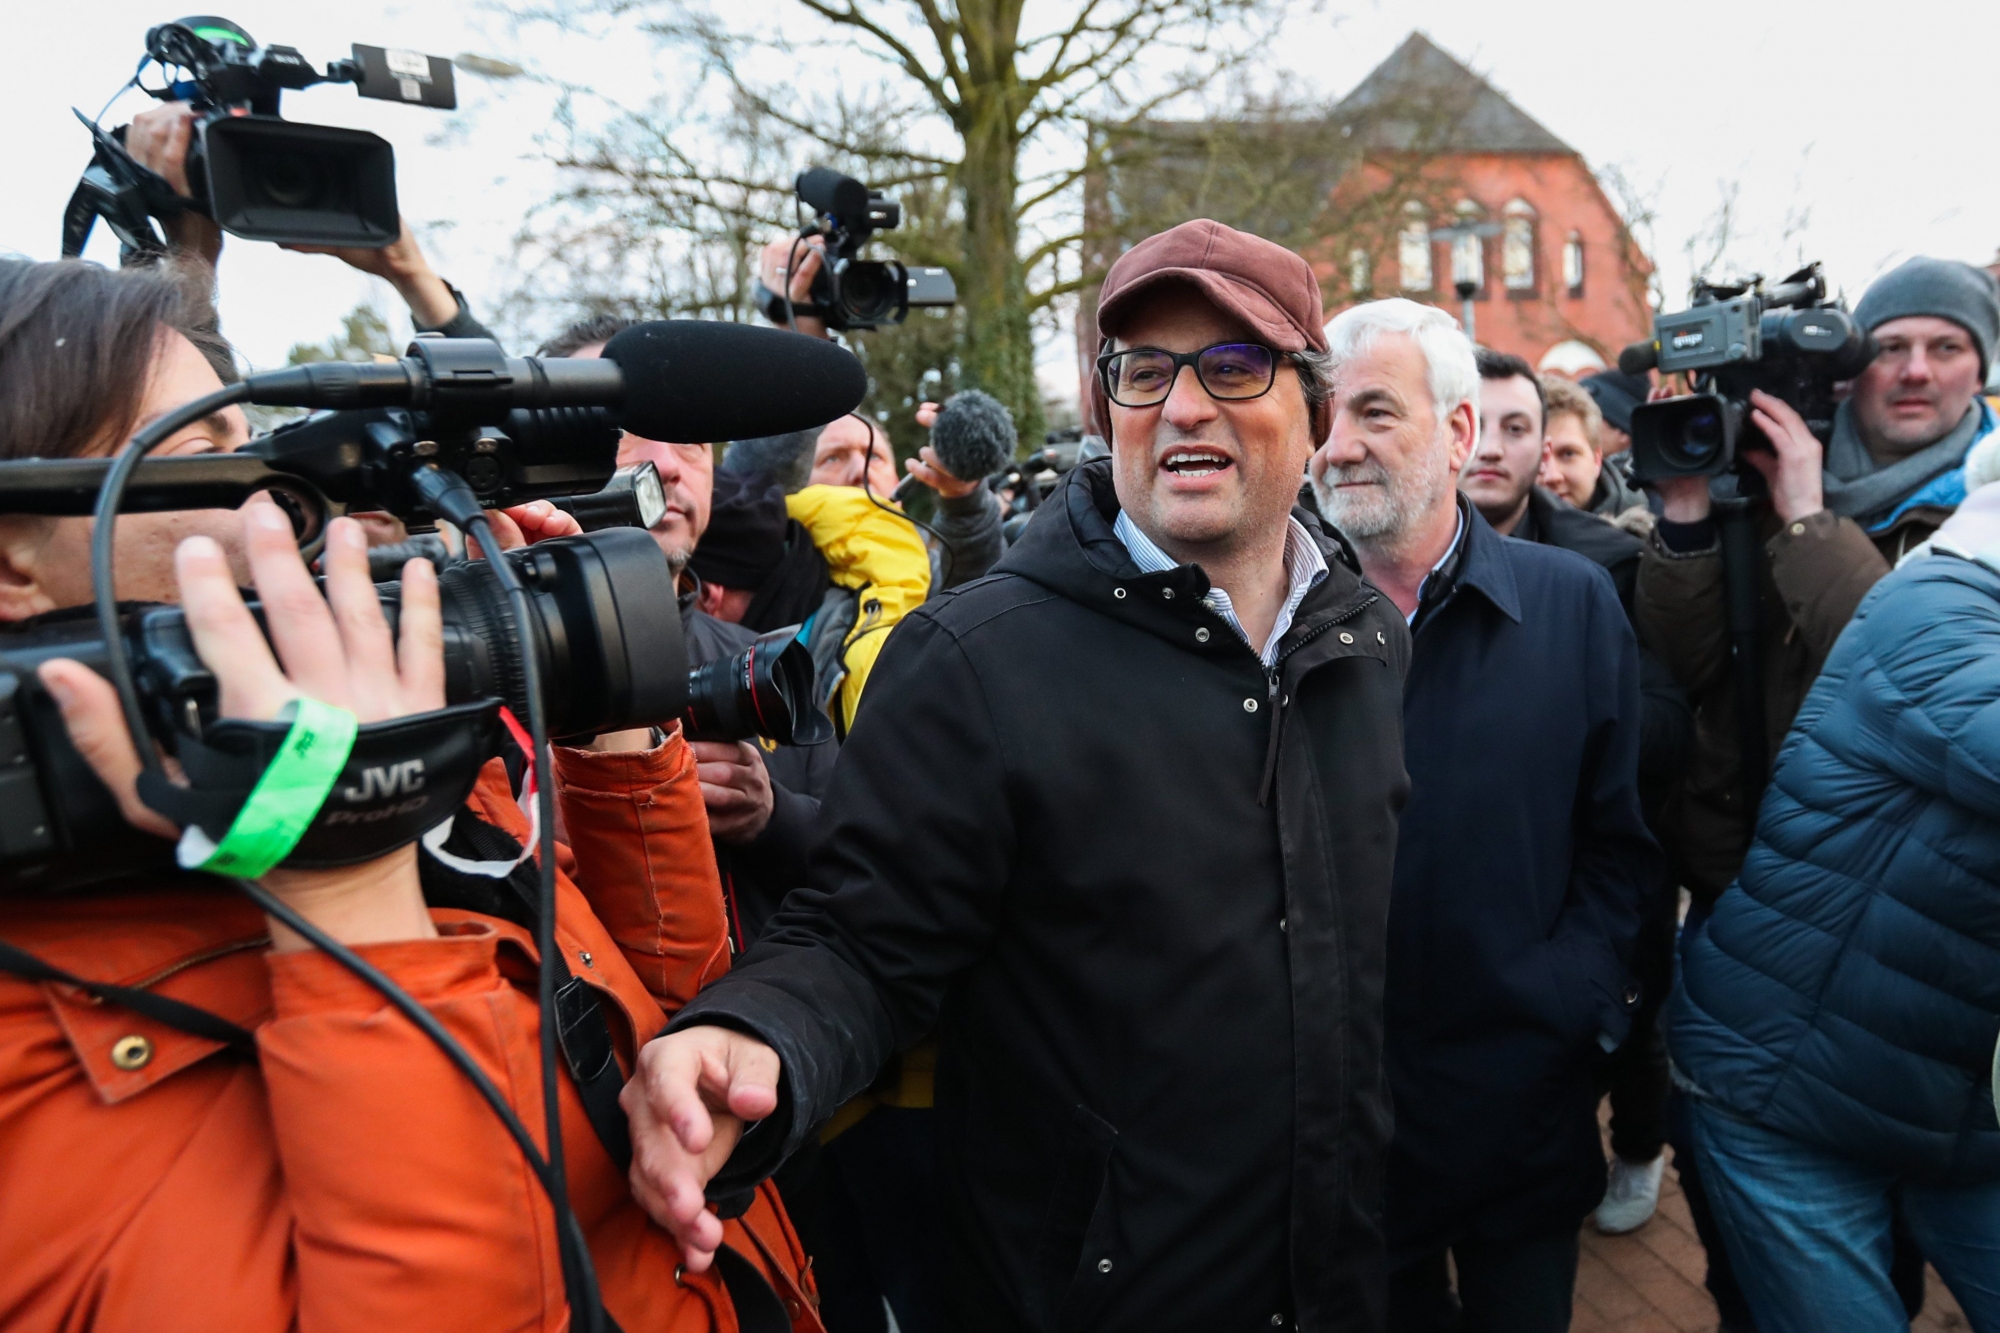 epa06630998 Catalan politician of Junts per Catalunya, Quim Torra, stands in between media at the prison in Neumuenster, Germany, 26 March 2018. German police on 25 March 2018 detained former Catalan leader Puigdemont after he crossed into Germany from Denmark. Puigdemont is sought by Spain who issued an European arrest warrant against the former leader who is living in exile in Belgium.  EPA/SRDJAN SUKI DEUTSCHLAND FESTNAHME PUIGDEMONT